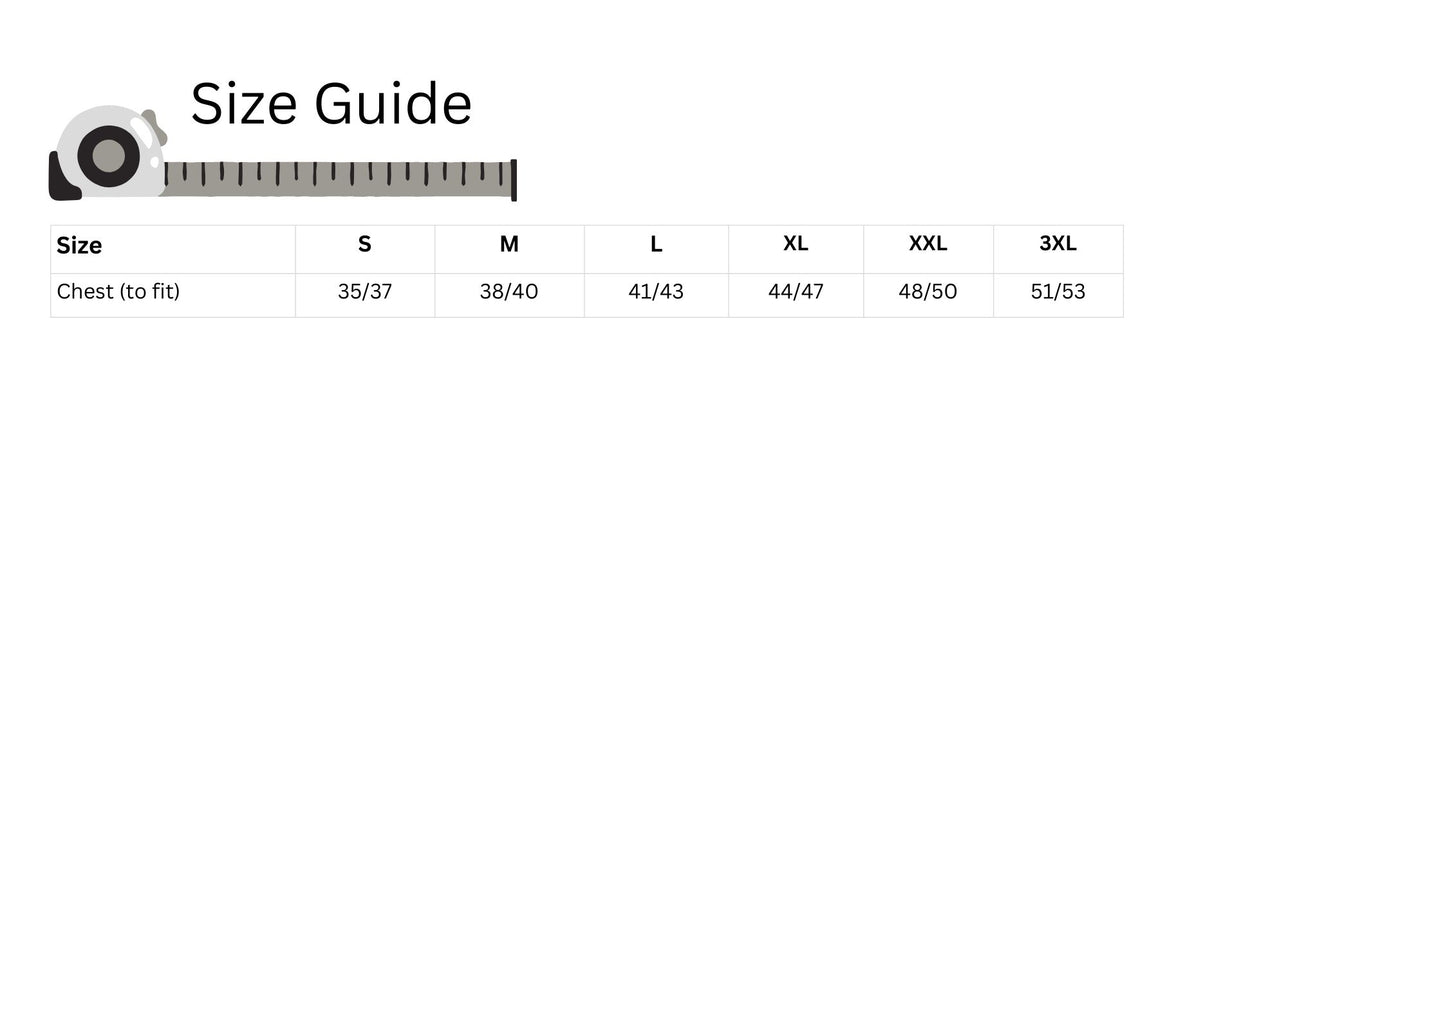 Size chart for T-shirts